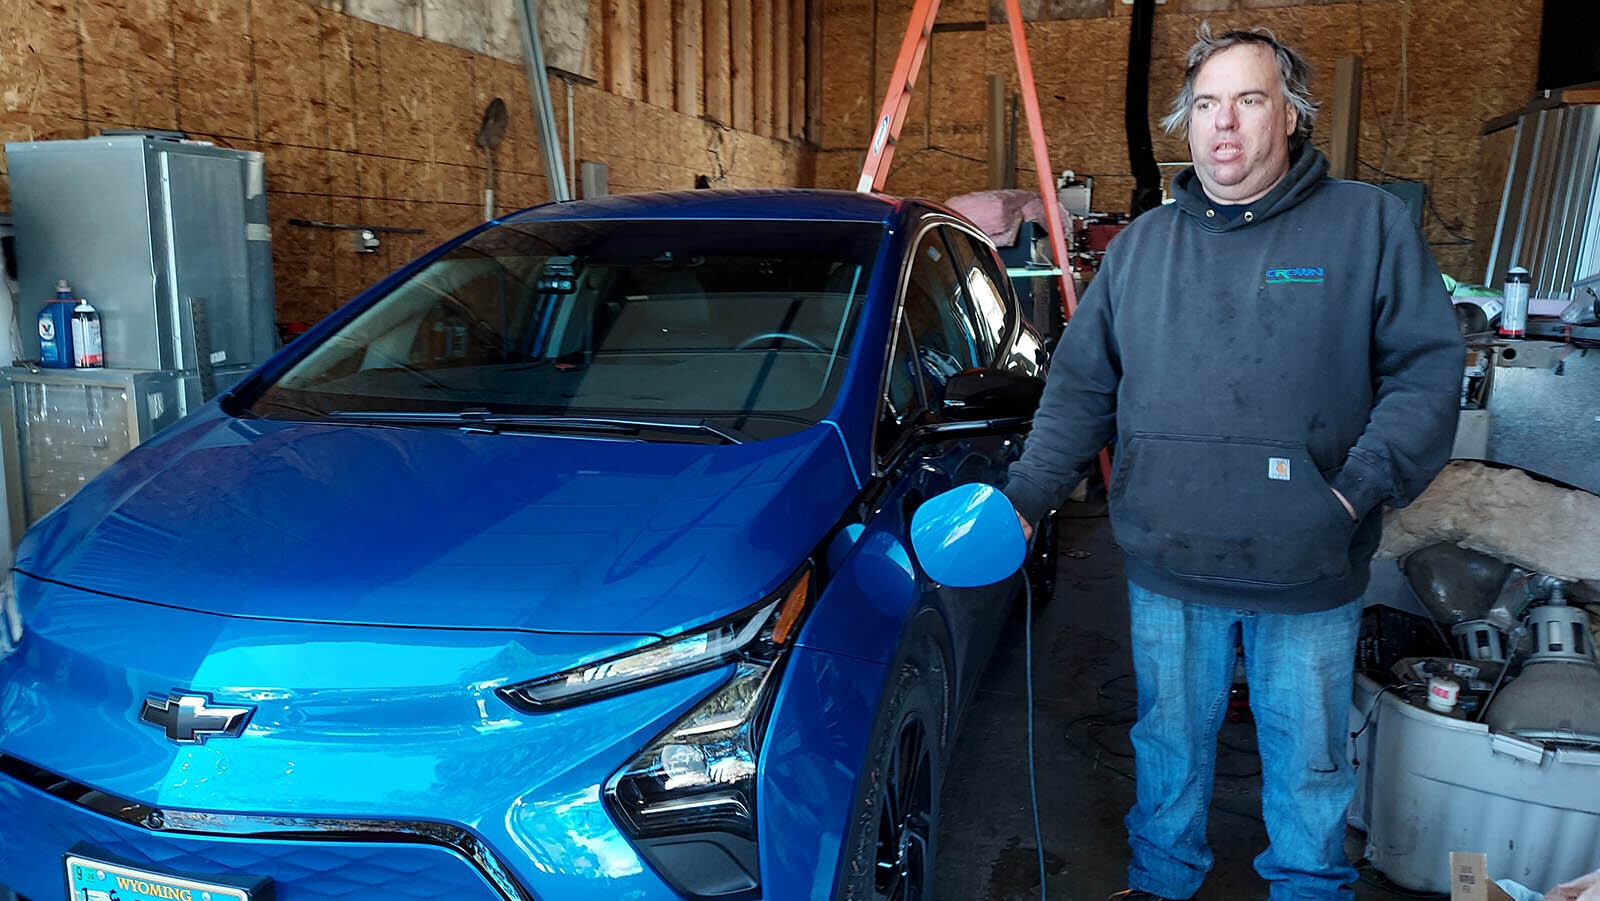 Robert Avery lives in Gillette, works for the coal industry and also drives an EV for Uber. He said the irony of driving an EV around the coal capital of the nation isn't lost on him, but that it's a great conversation starter and people are usually surprised when they ride in his EV.